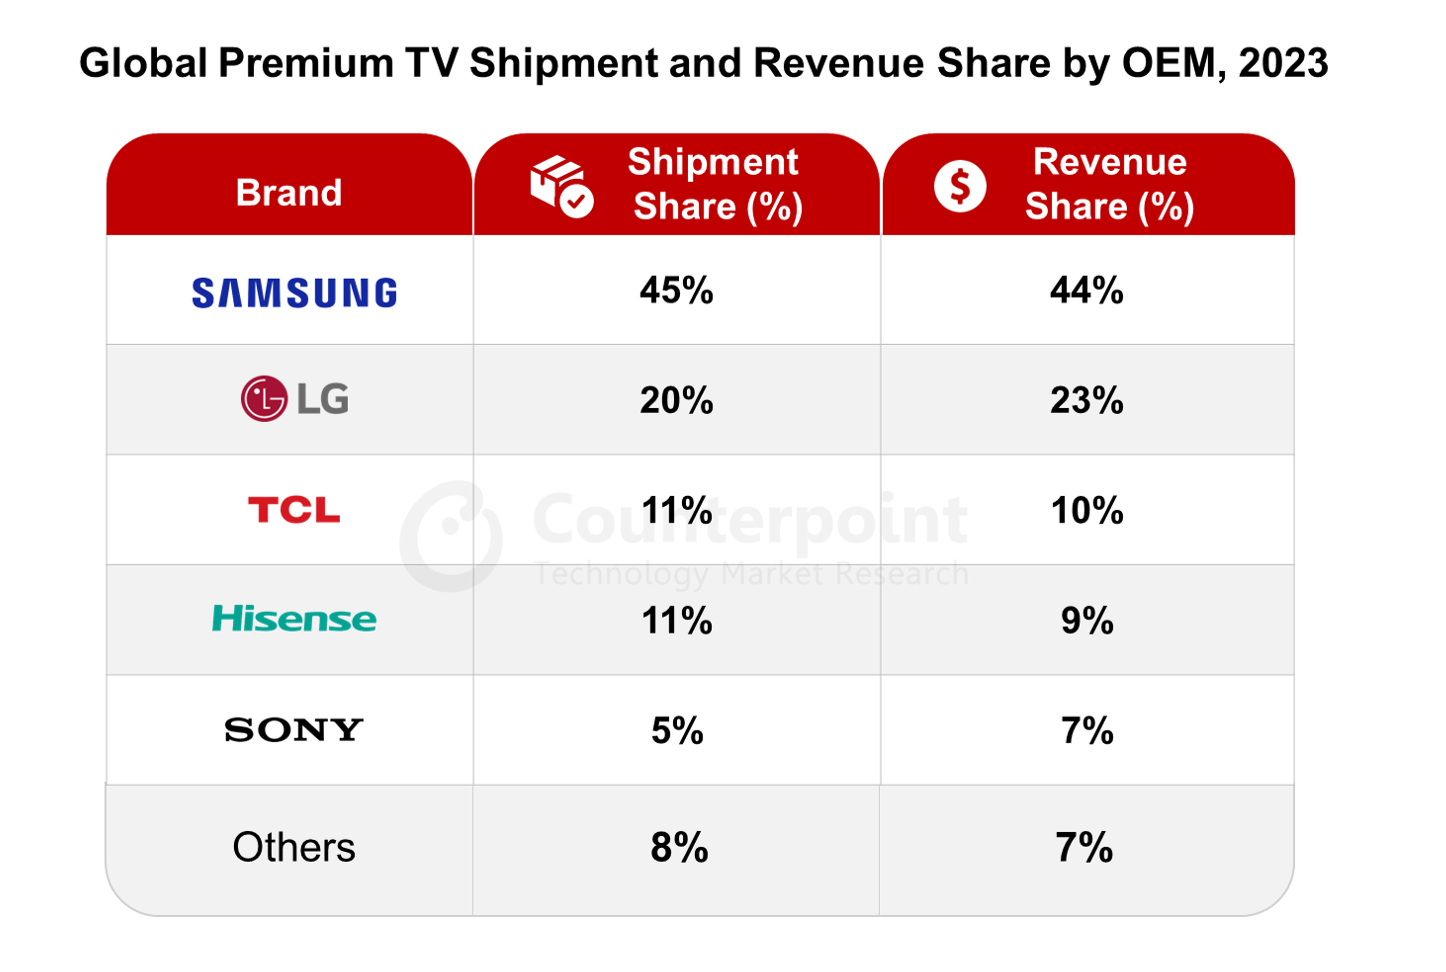 Global Premium TV Shipment and Revenue Share by OEM, 2023